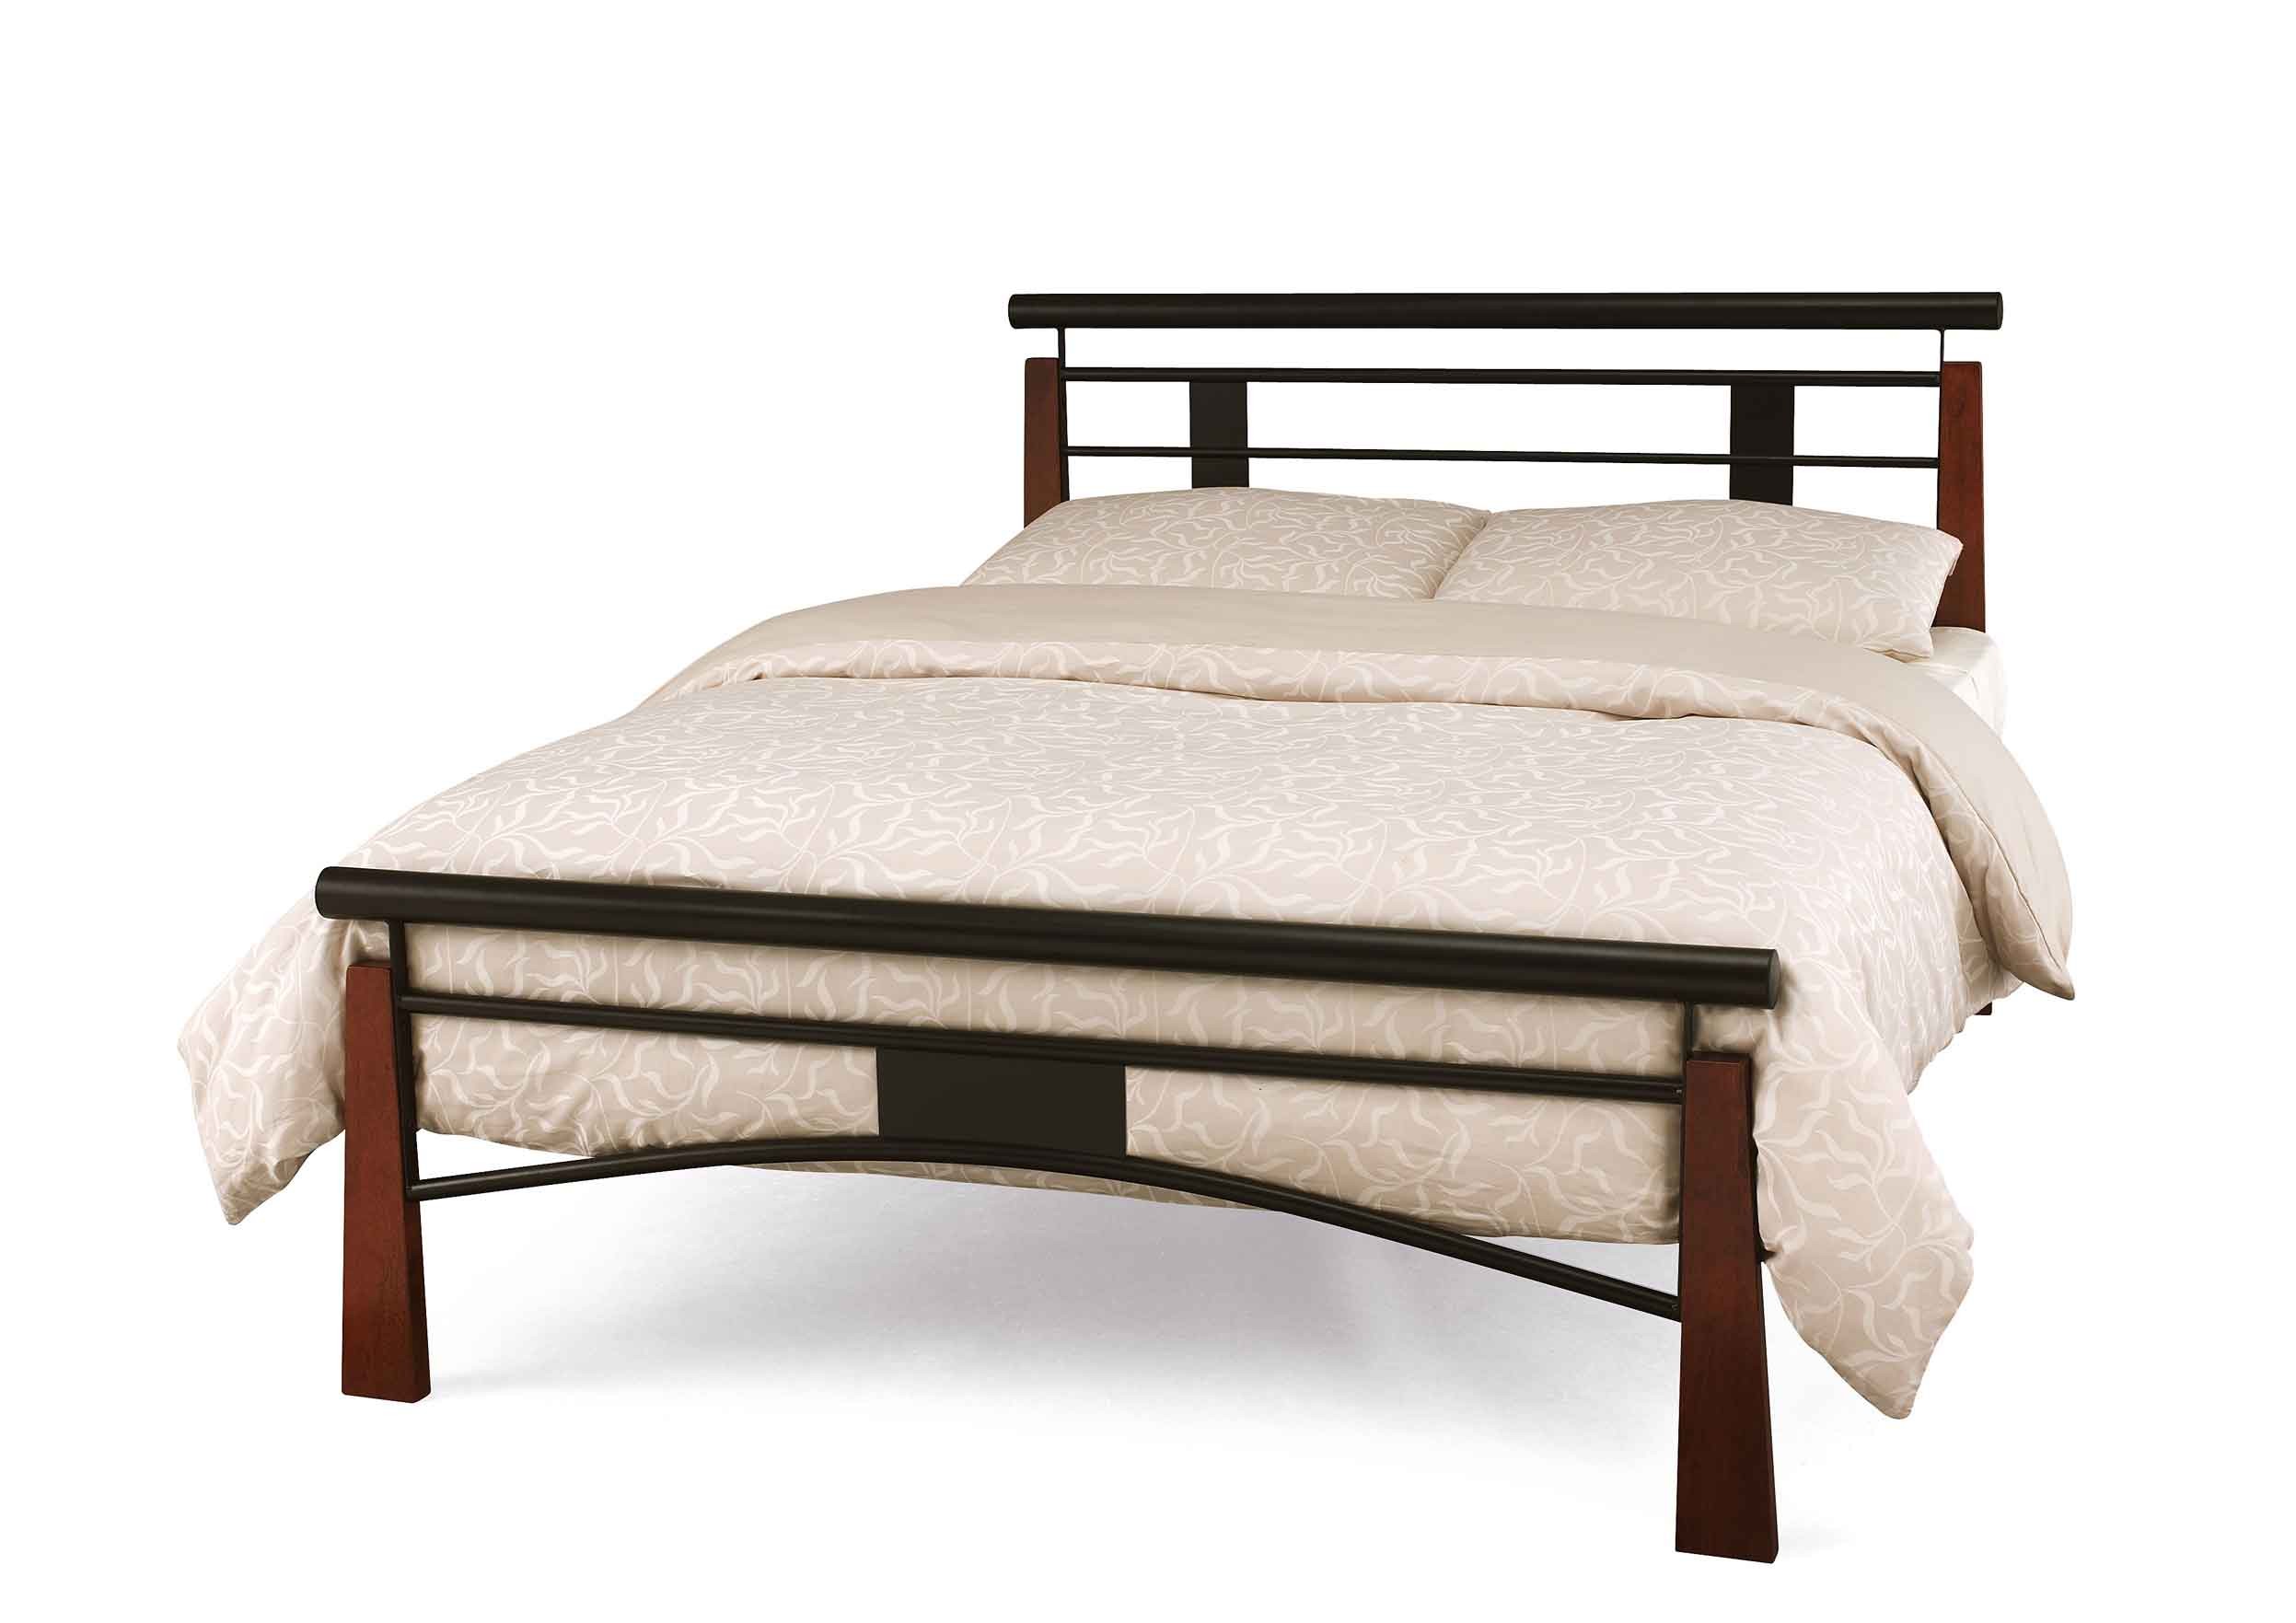 Armstrong Bed Frame Assembly Instructions (Serene)